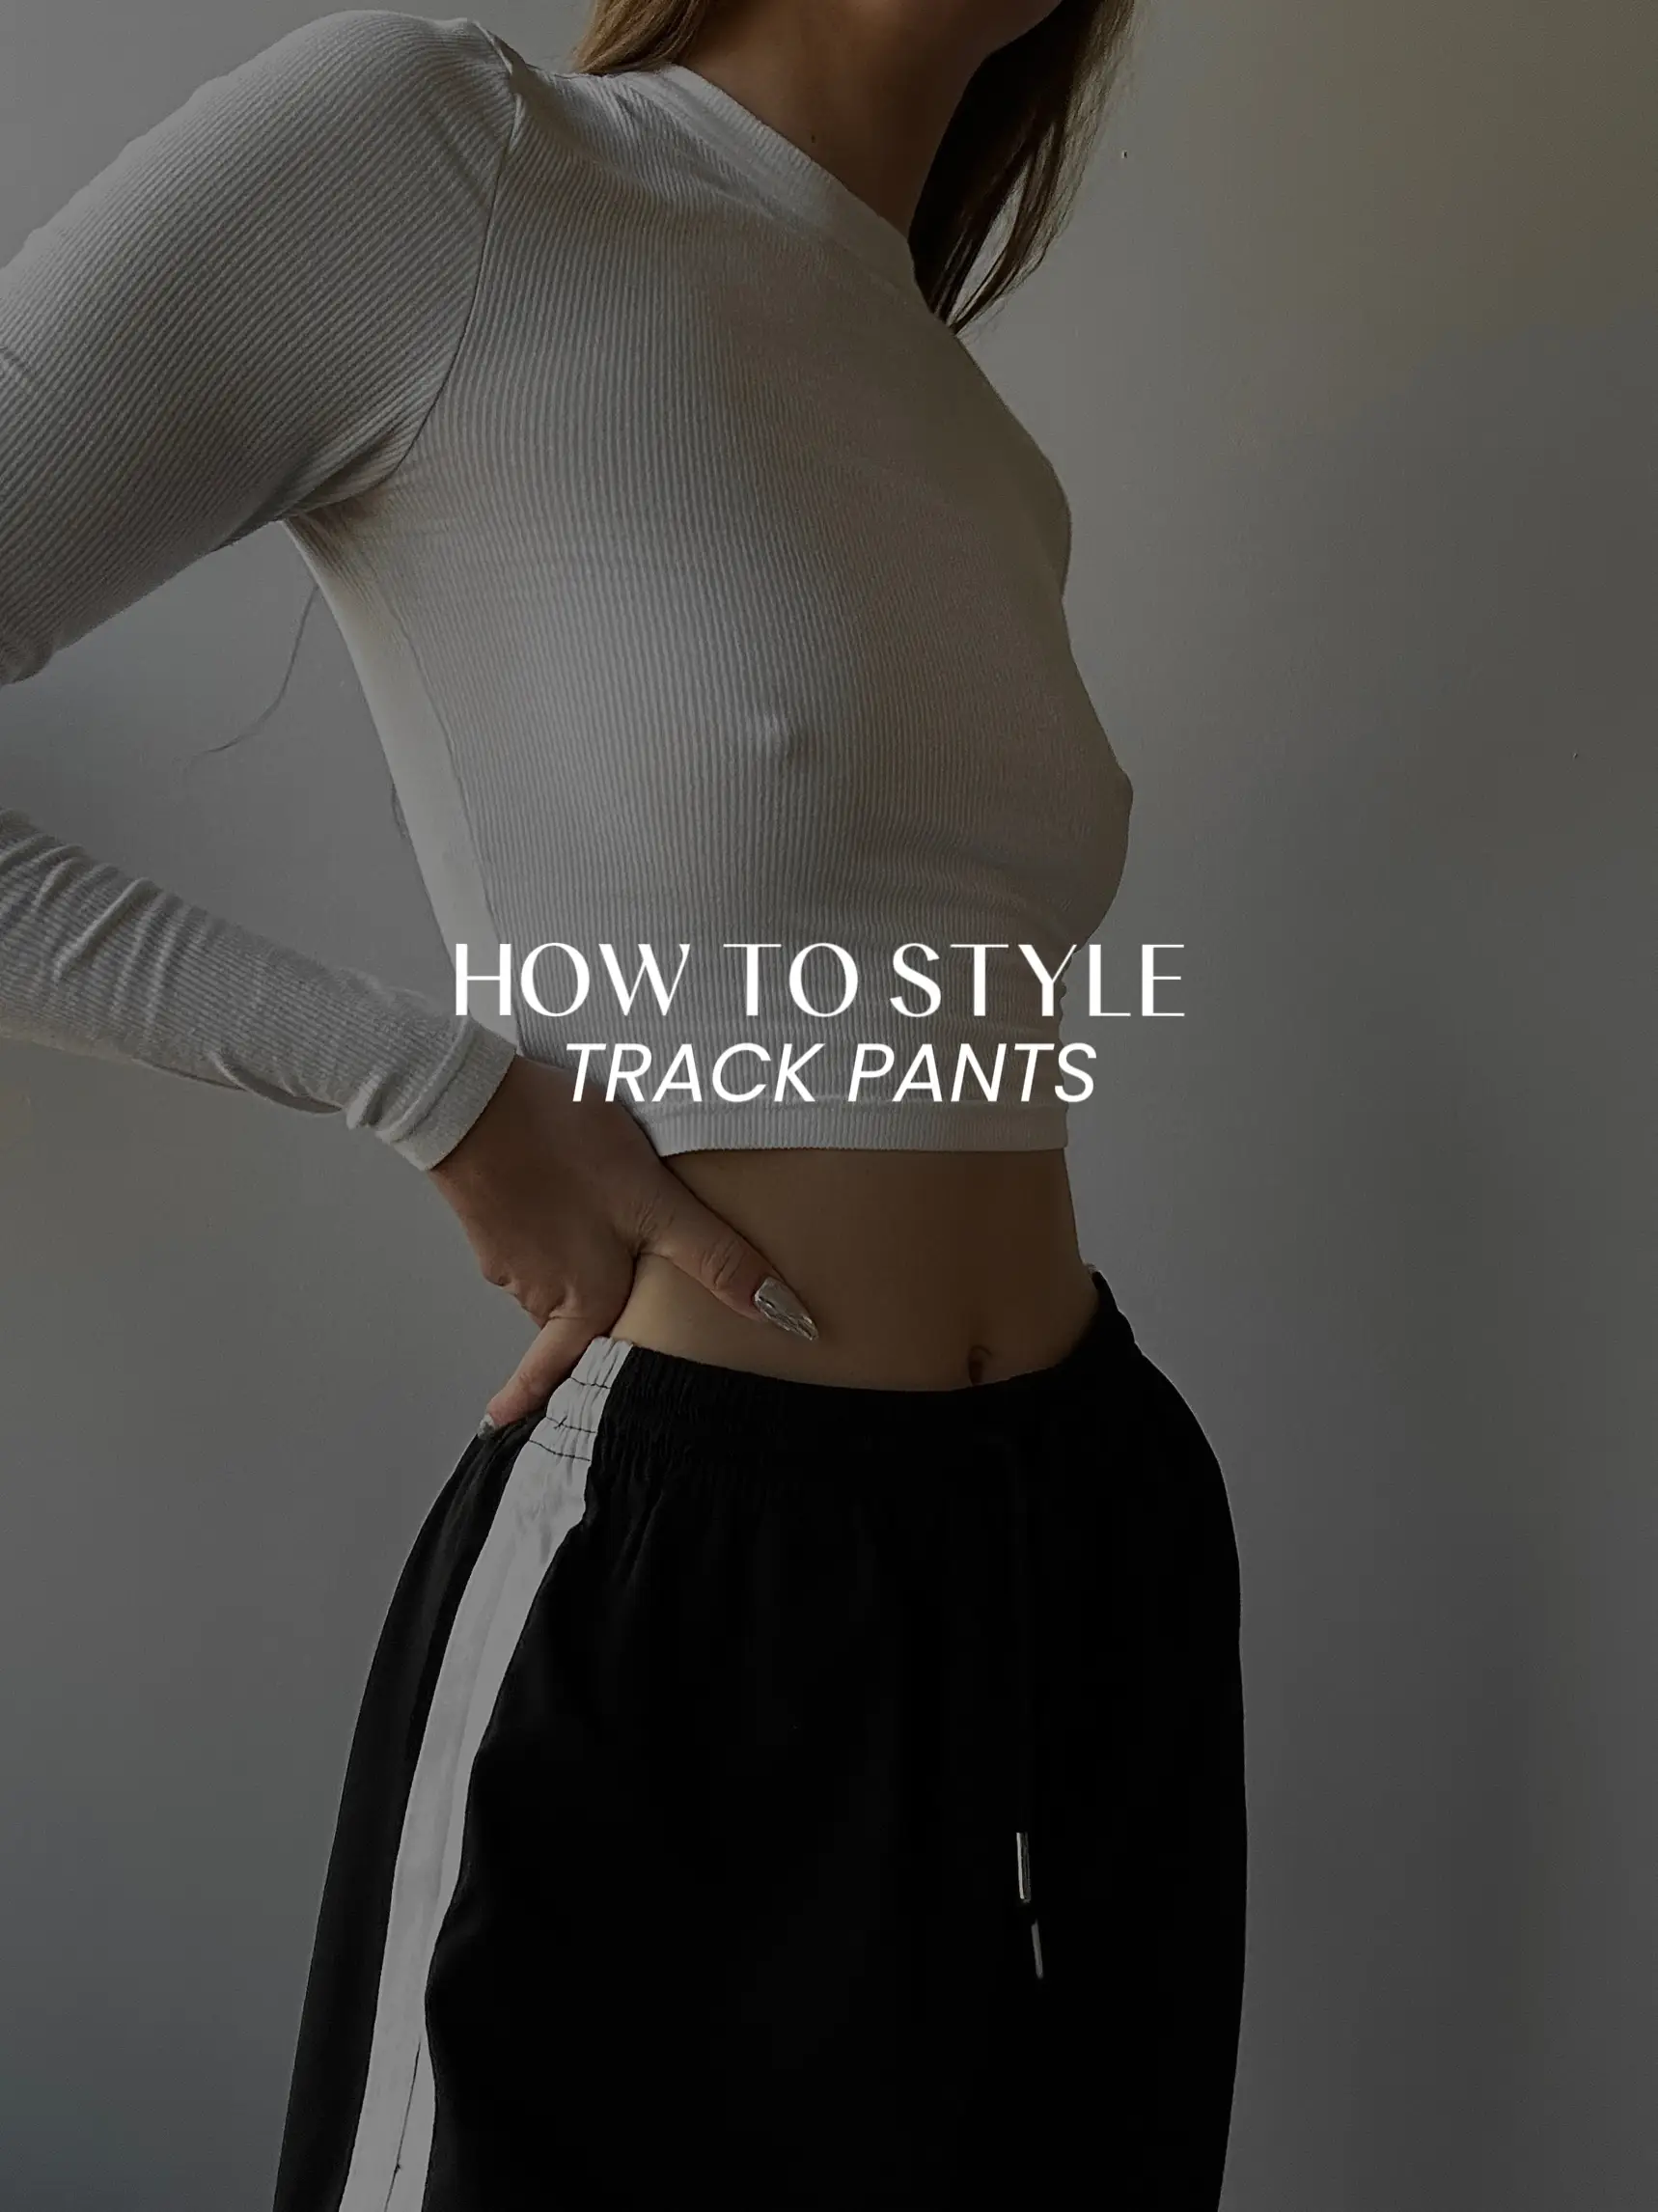 85 Best TRACK PANTS OUTFIT ideas  track pants outfit, pants outfit, fashion